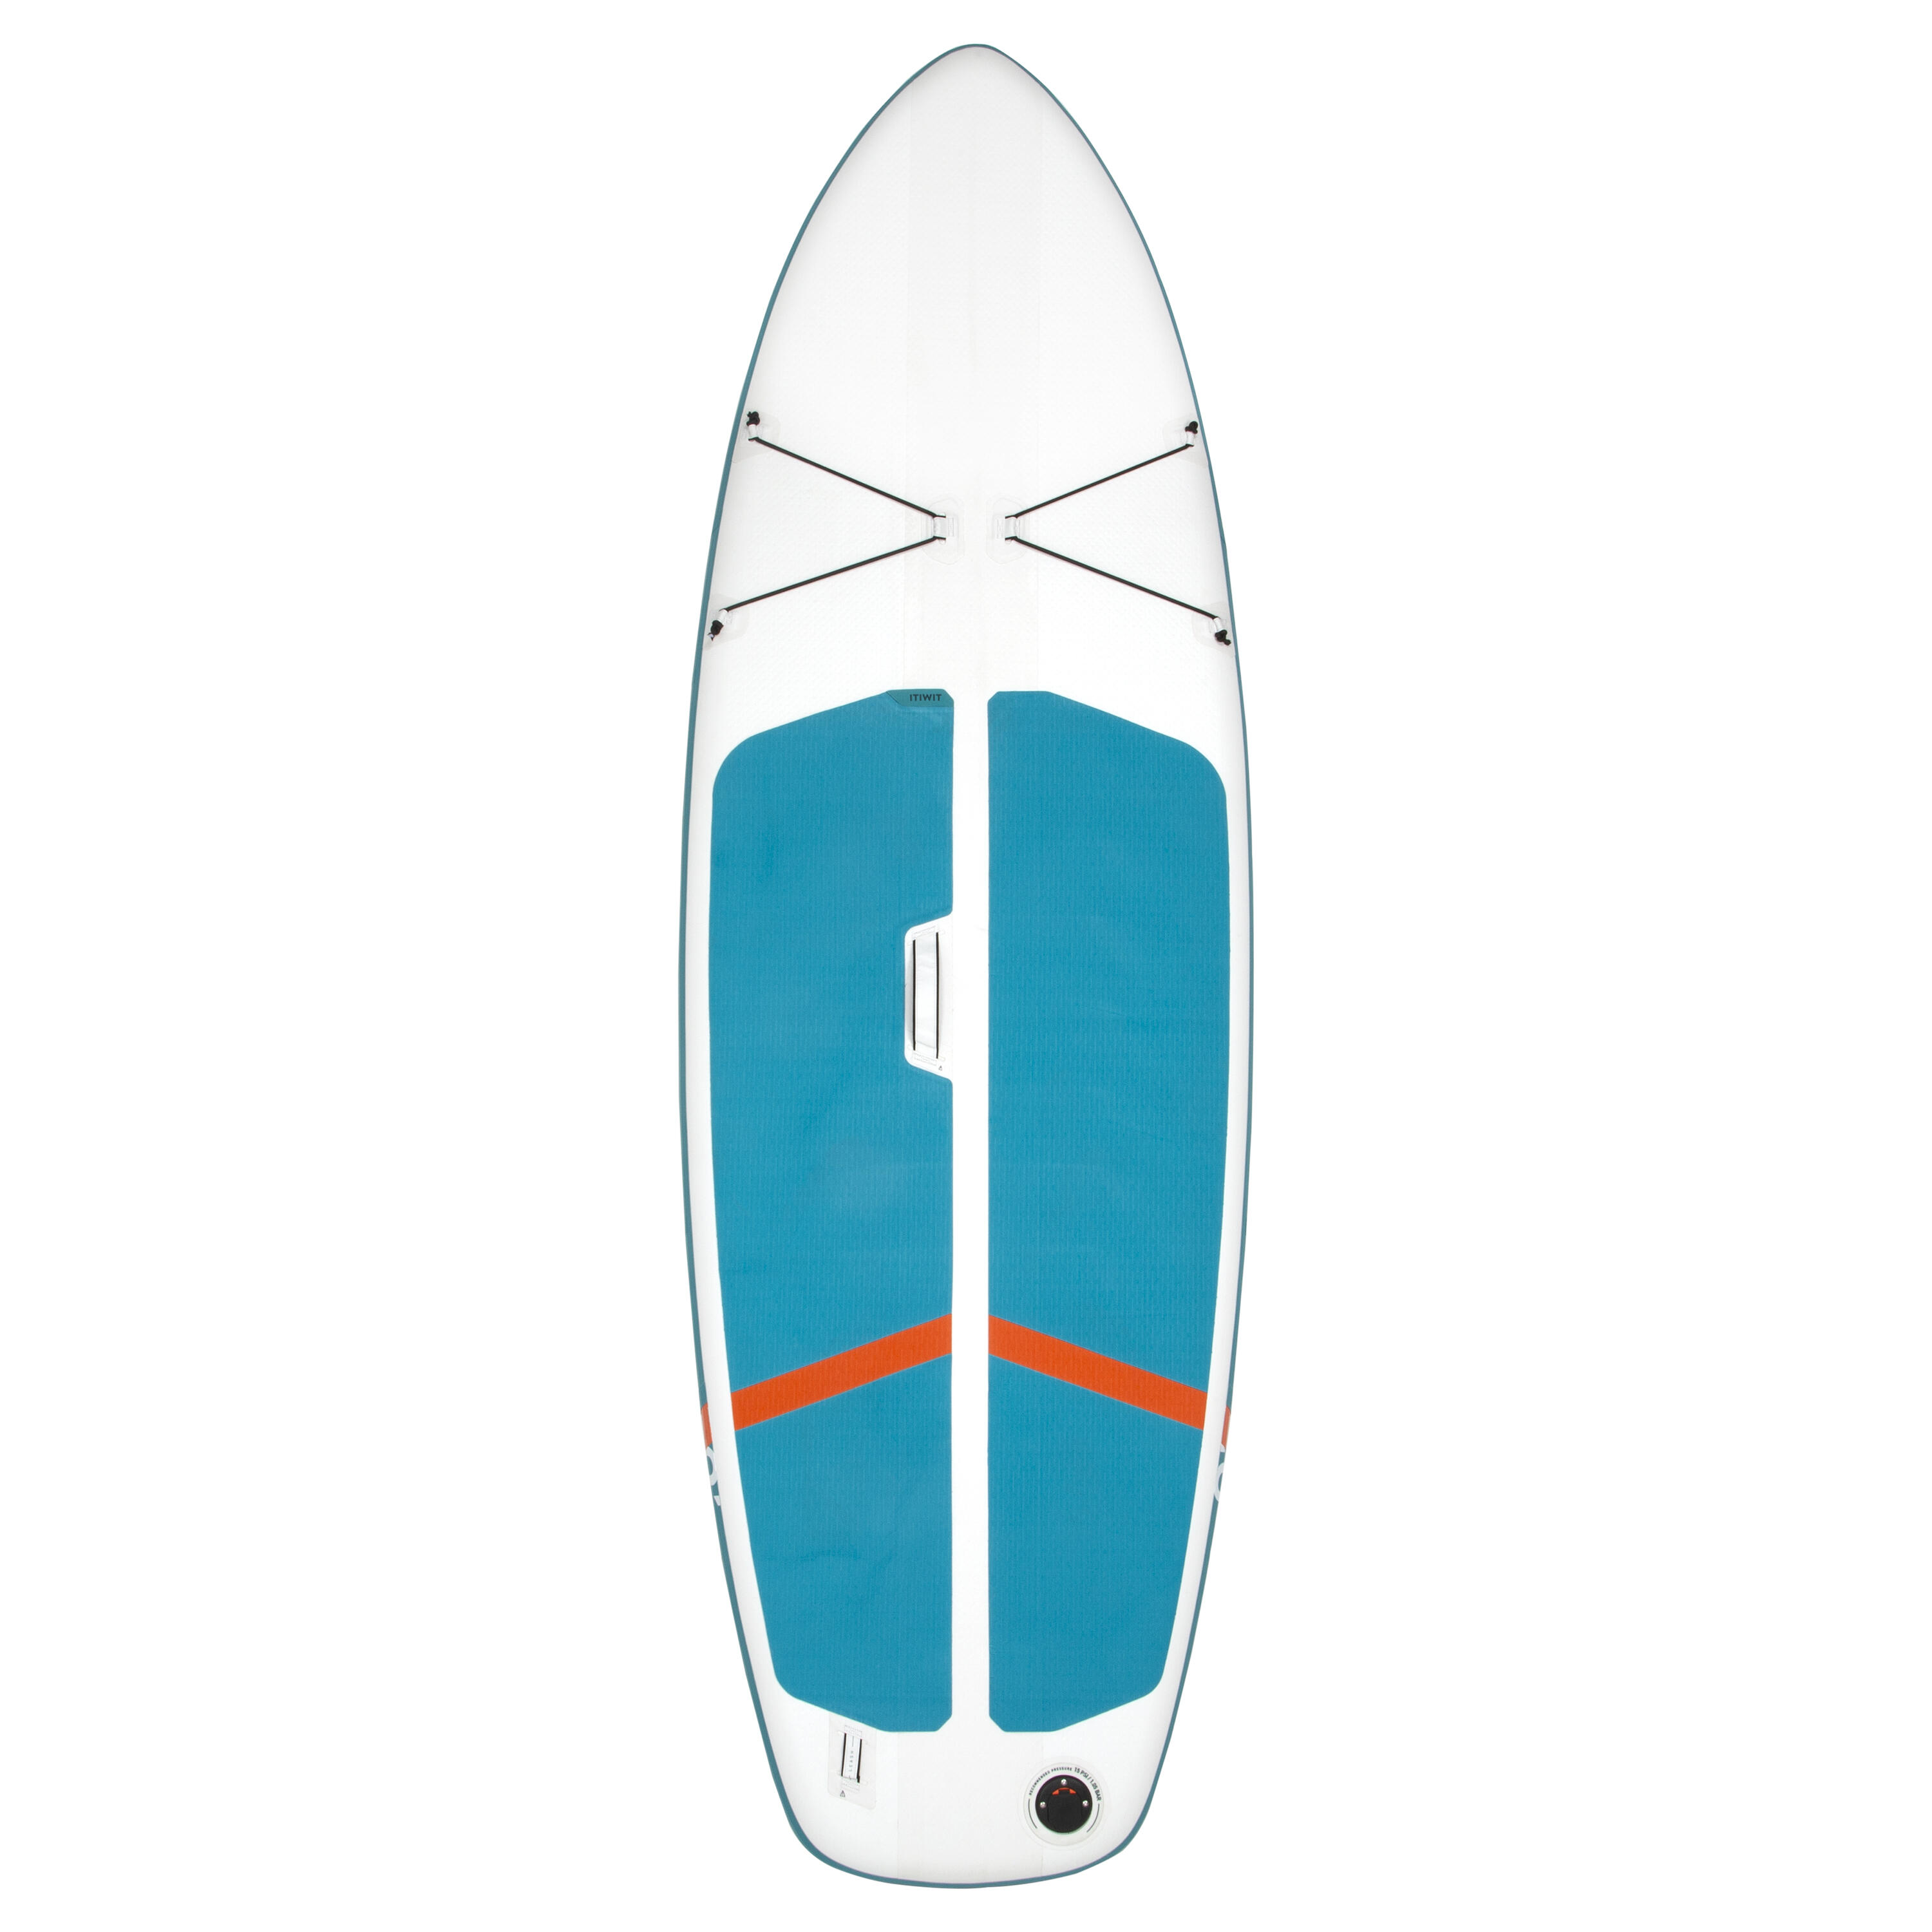 100 COMPACT 9FT (M) INFLATABLE STAND-UP PADDLEBOARD - WHITE AND GREEN (80kg) 7/29